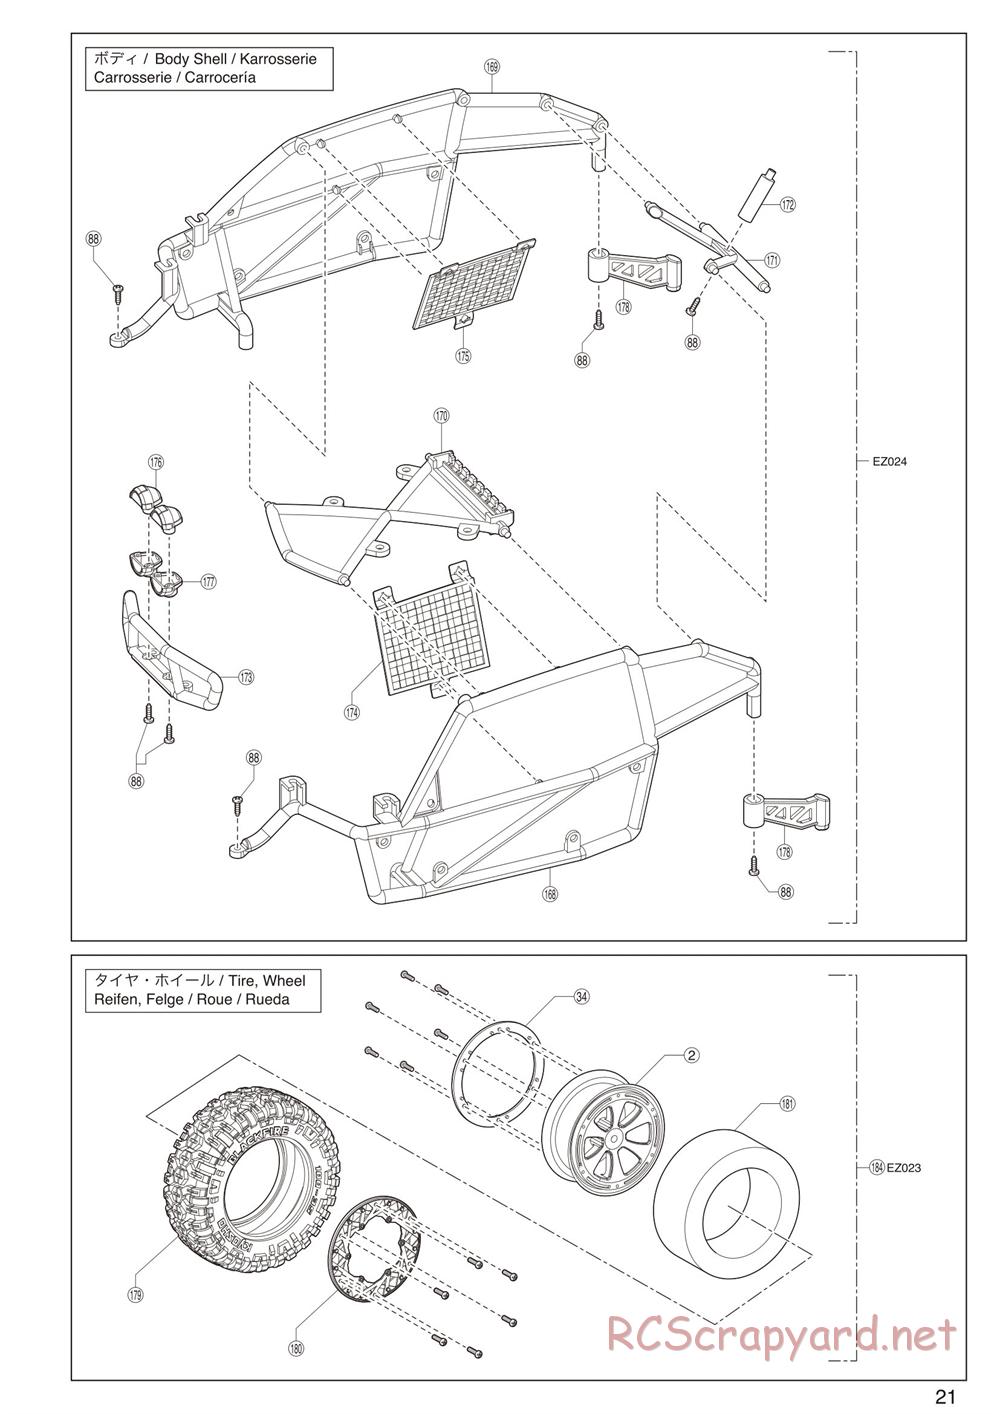 Kyosho - Axxe 2WD Desert Buggy - Exploded Views - Page 5